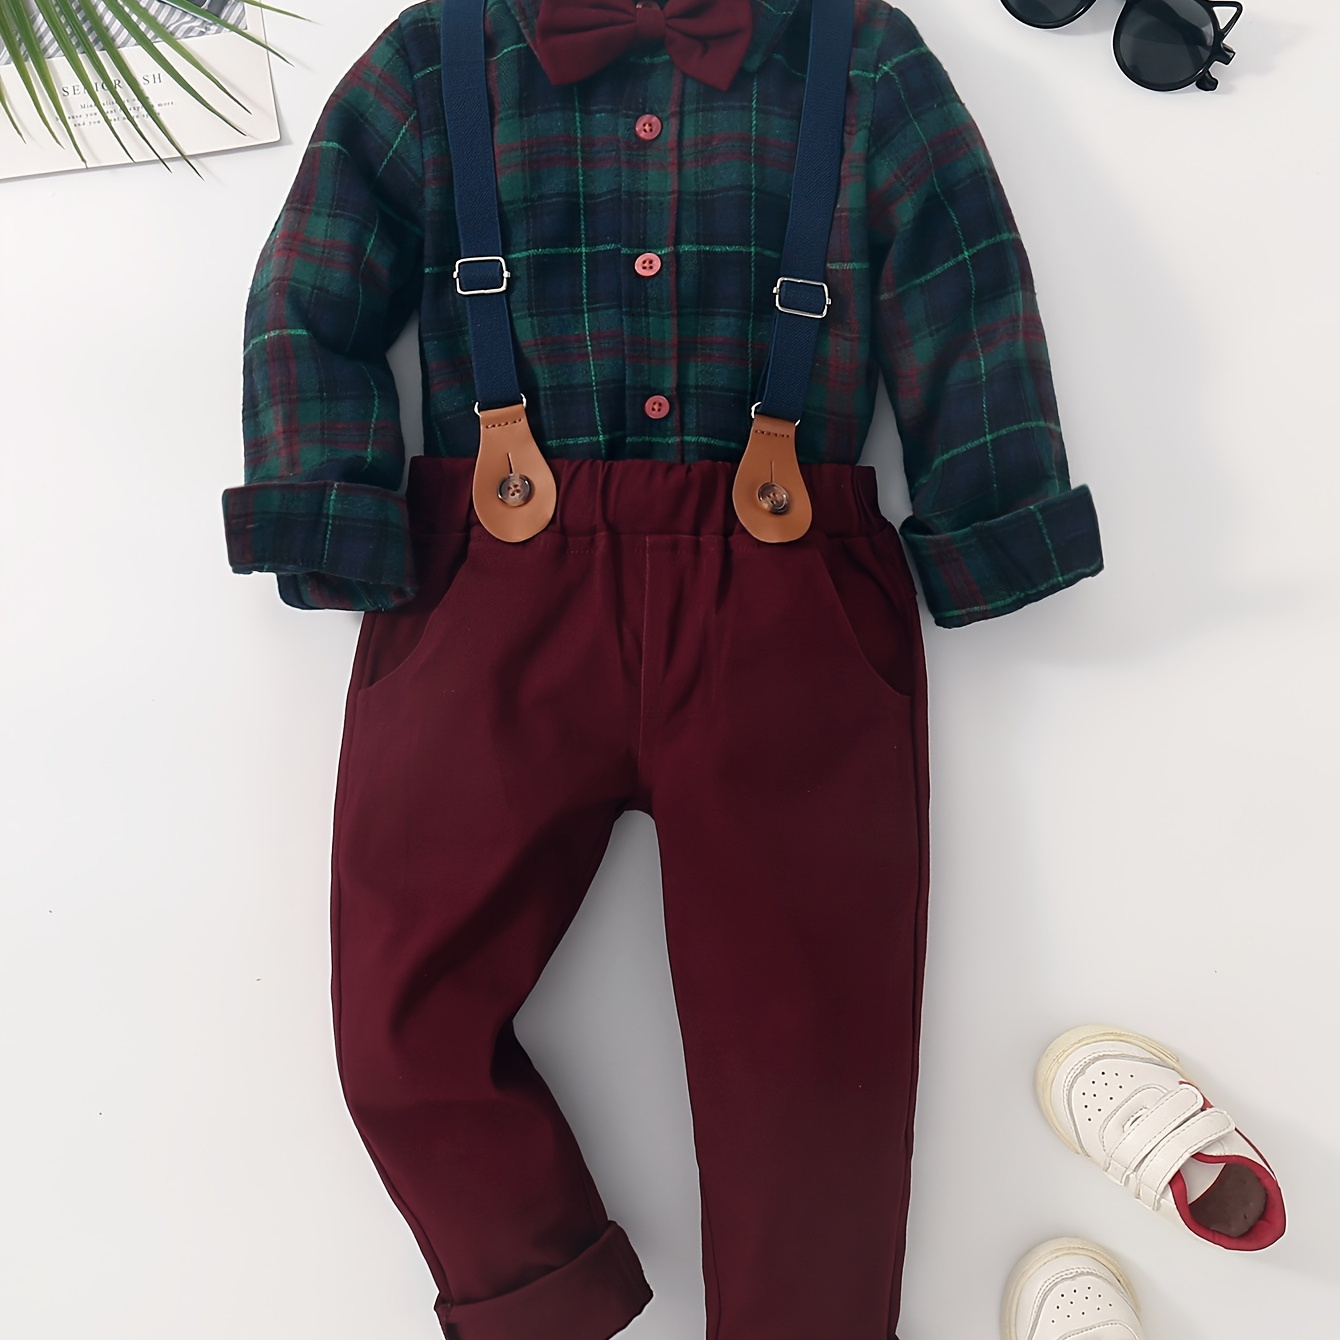 

Boy's Color Clash Gentleman Outfit, Bowtie Plaid Pattern Shirt & Overalls Set, Formal Wear For Speech Performance Birthday Party, Kid's Clothes, As Christmas Gift